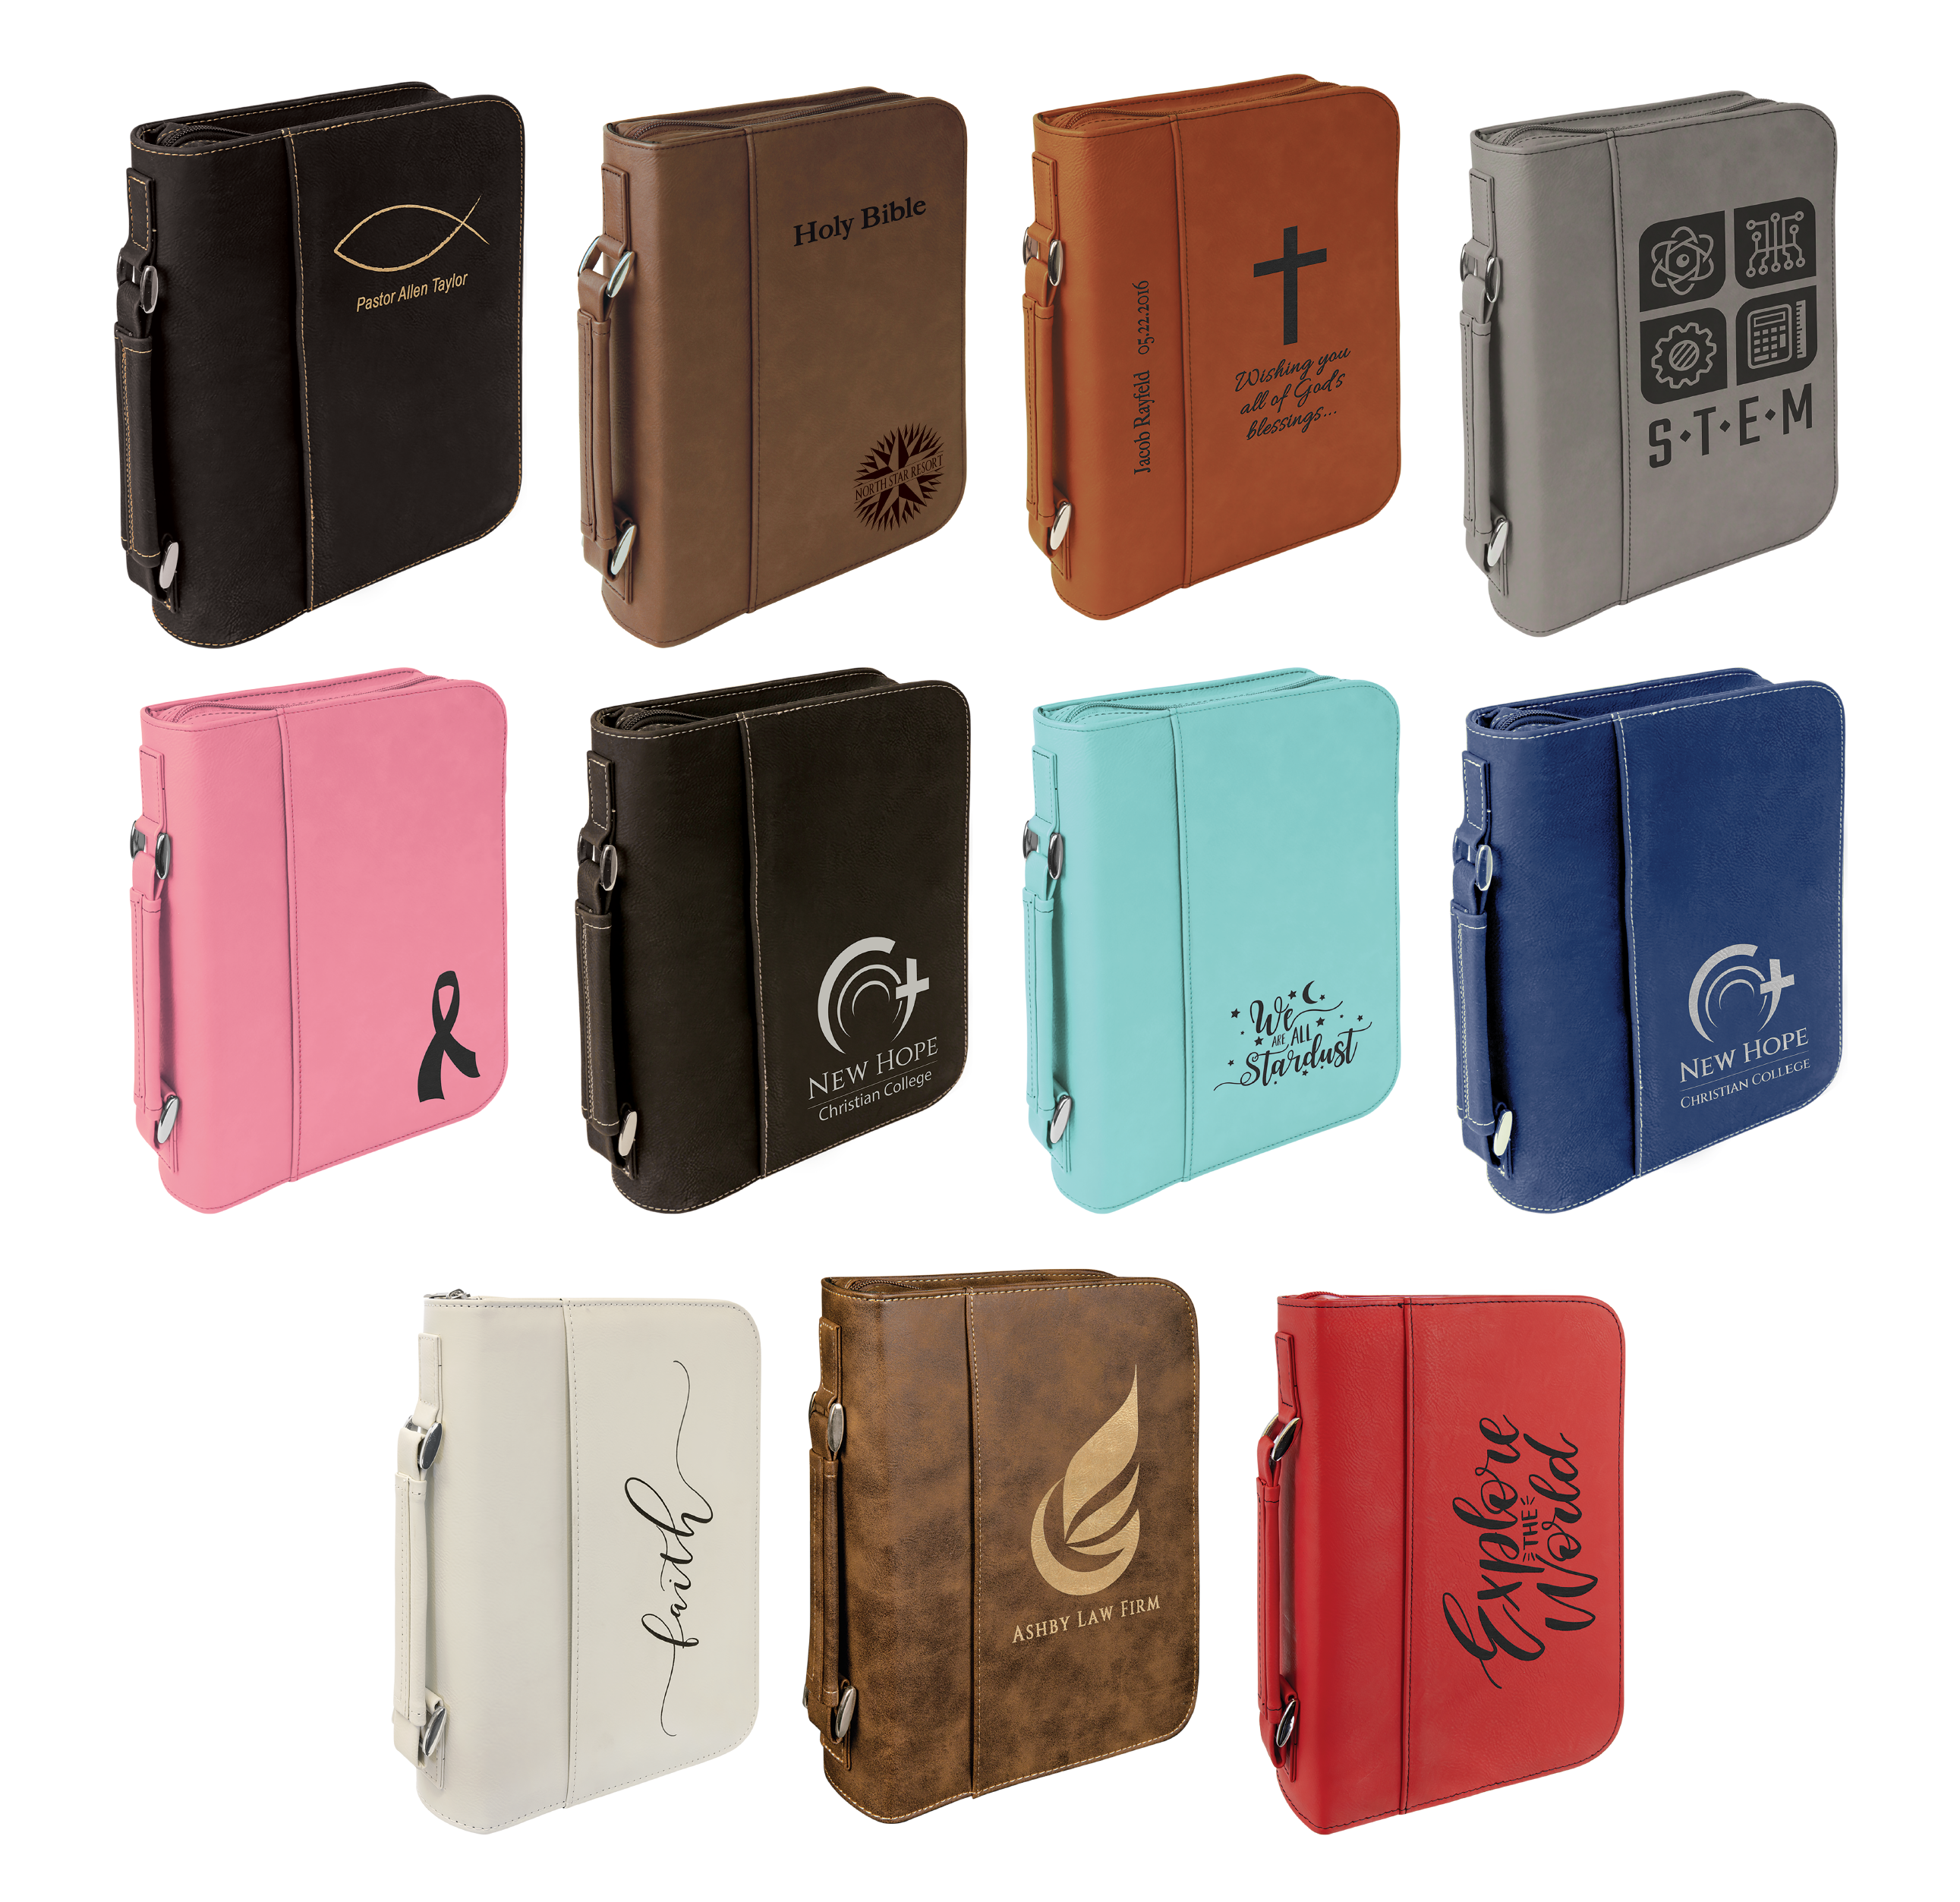 Personalized Bible/Book Cover with Pocket, Handle and Zipper, Leatherette, 7.5” x 10.75”